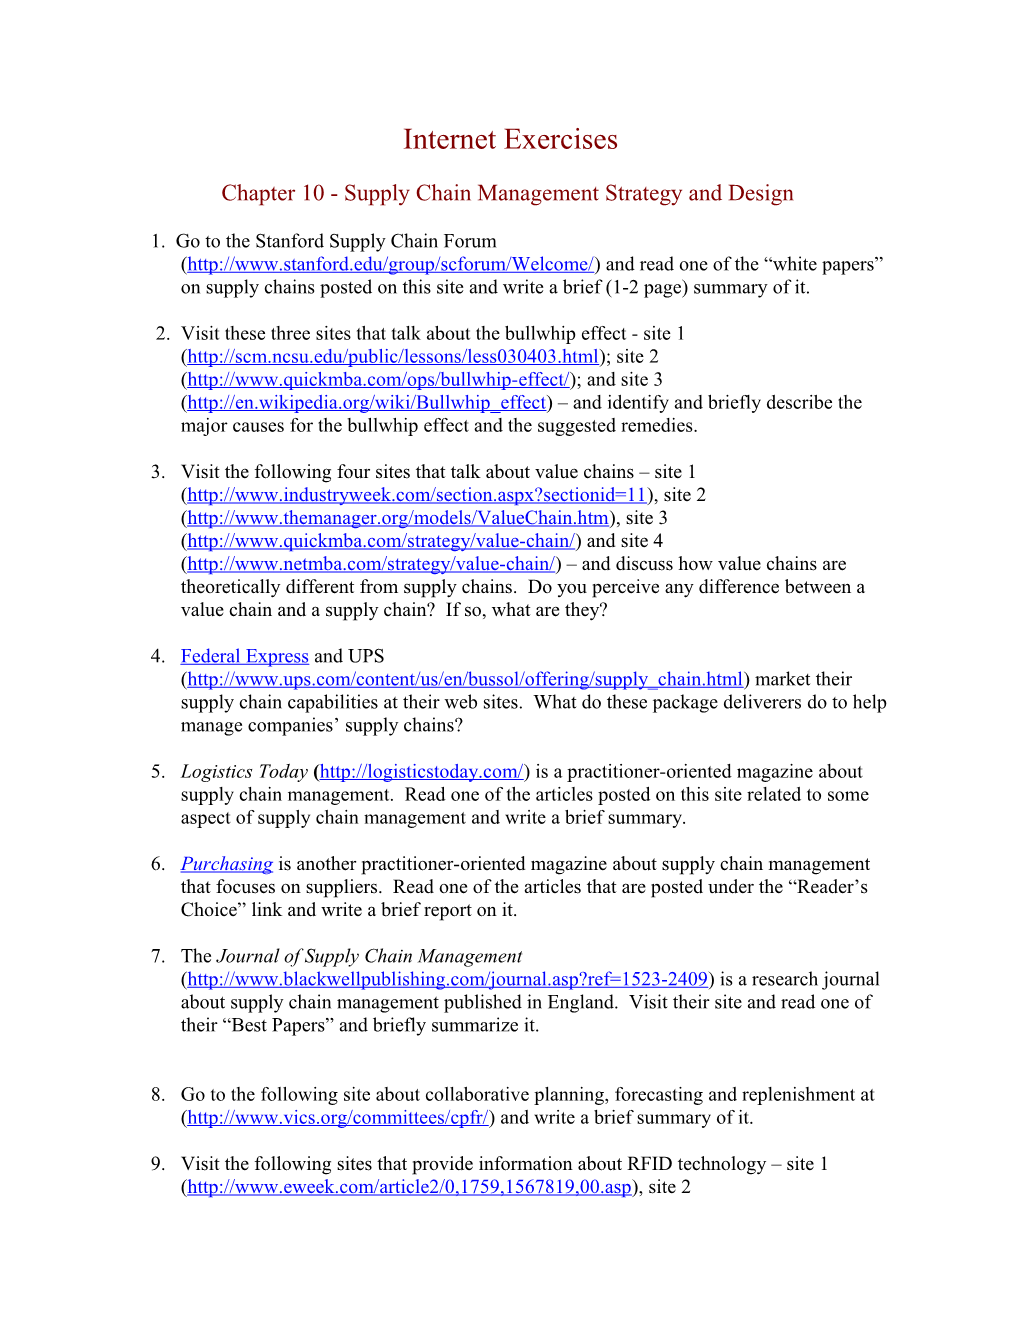 Chapter 10 - Supply Chain Management Strategy and Design